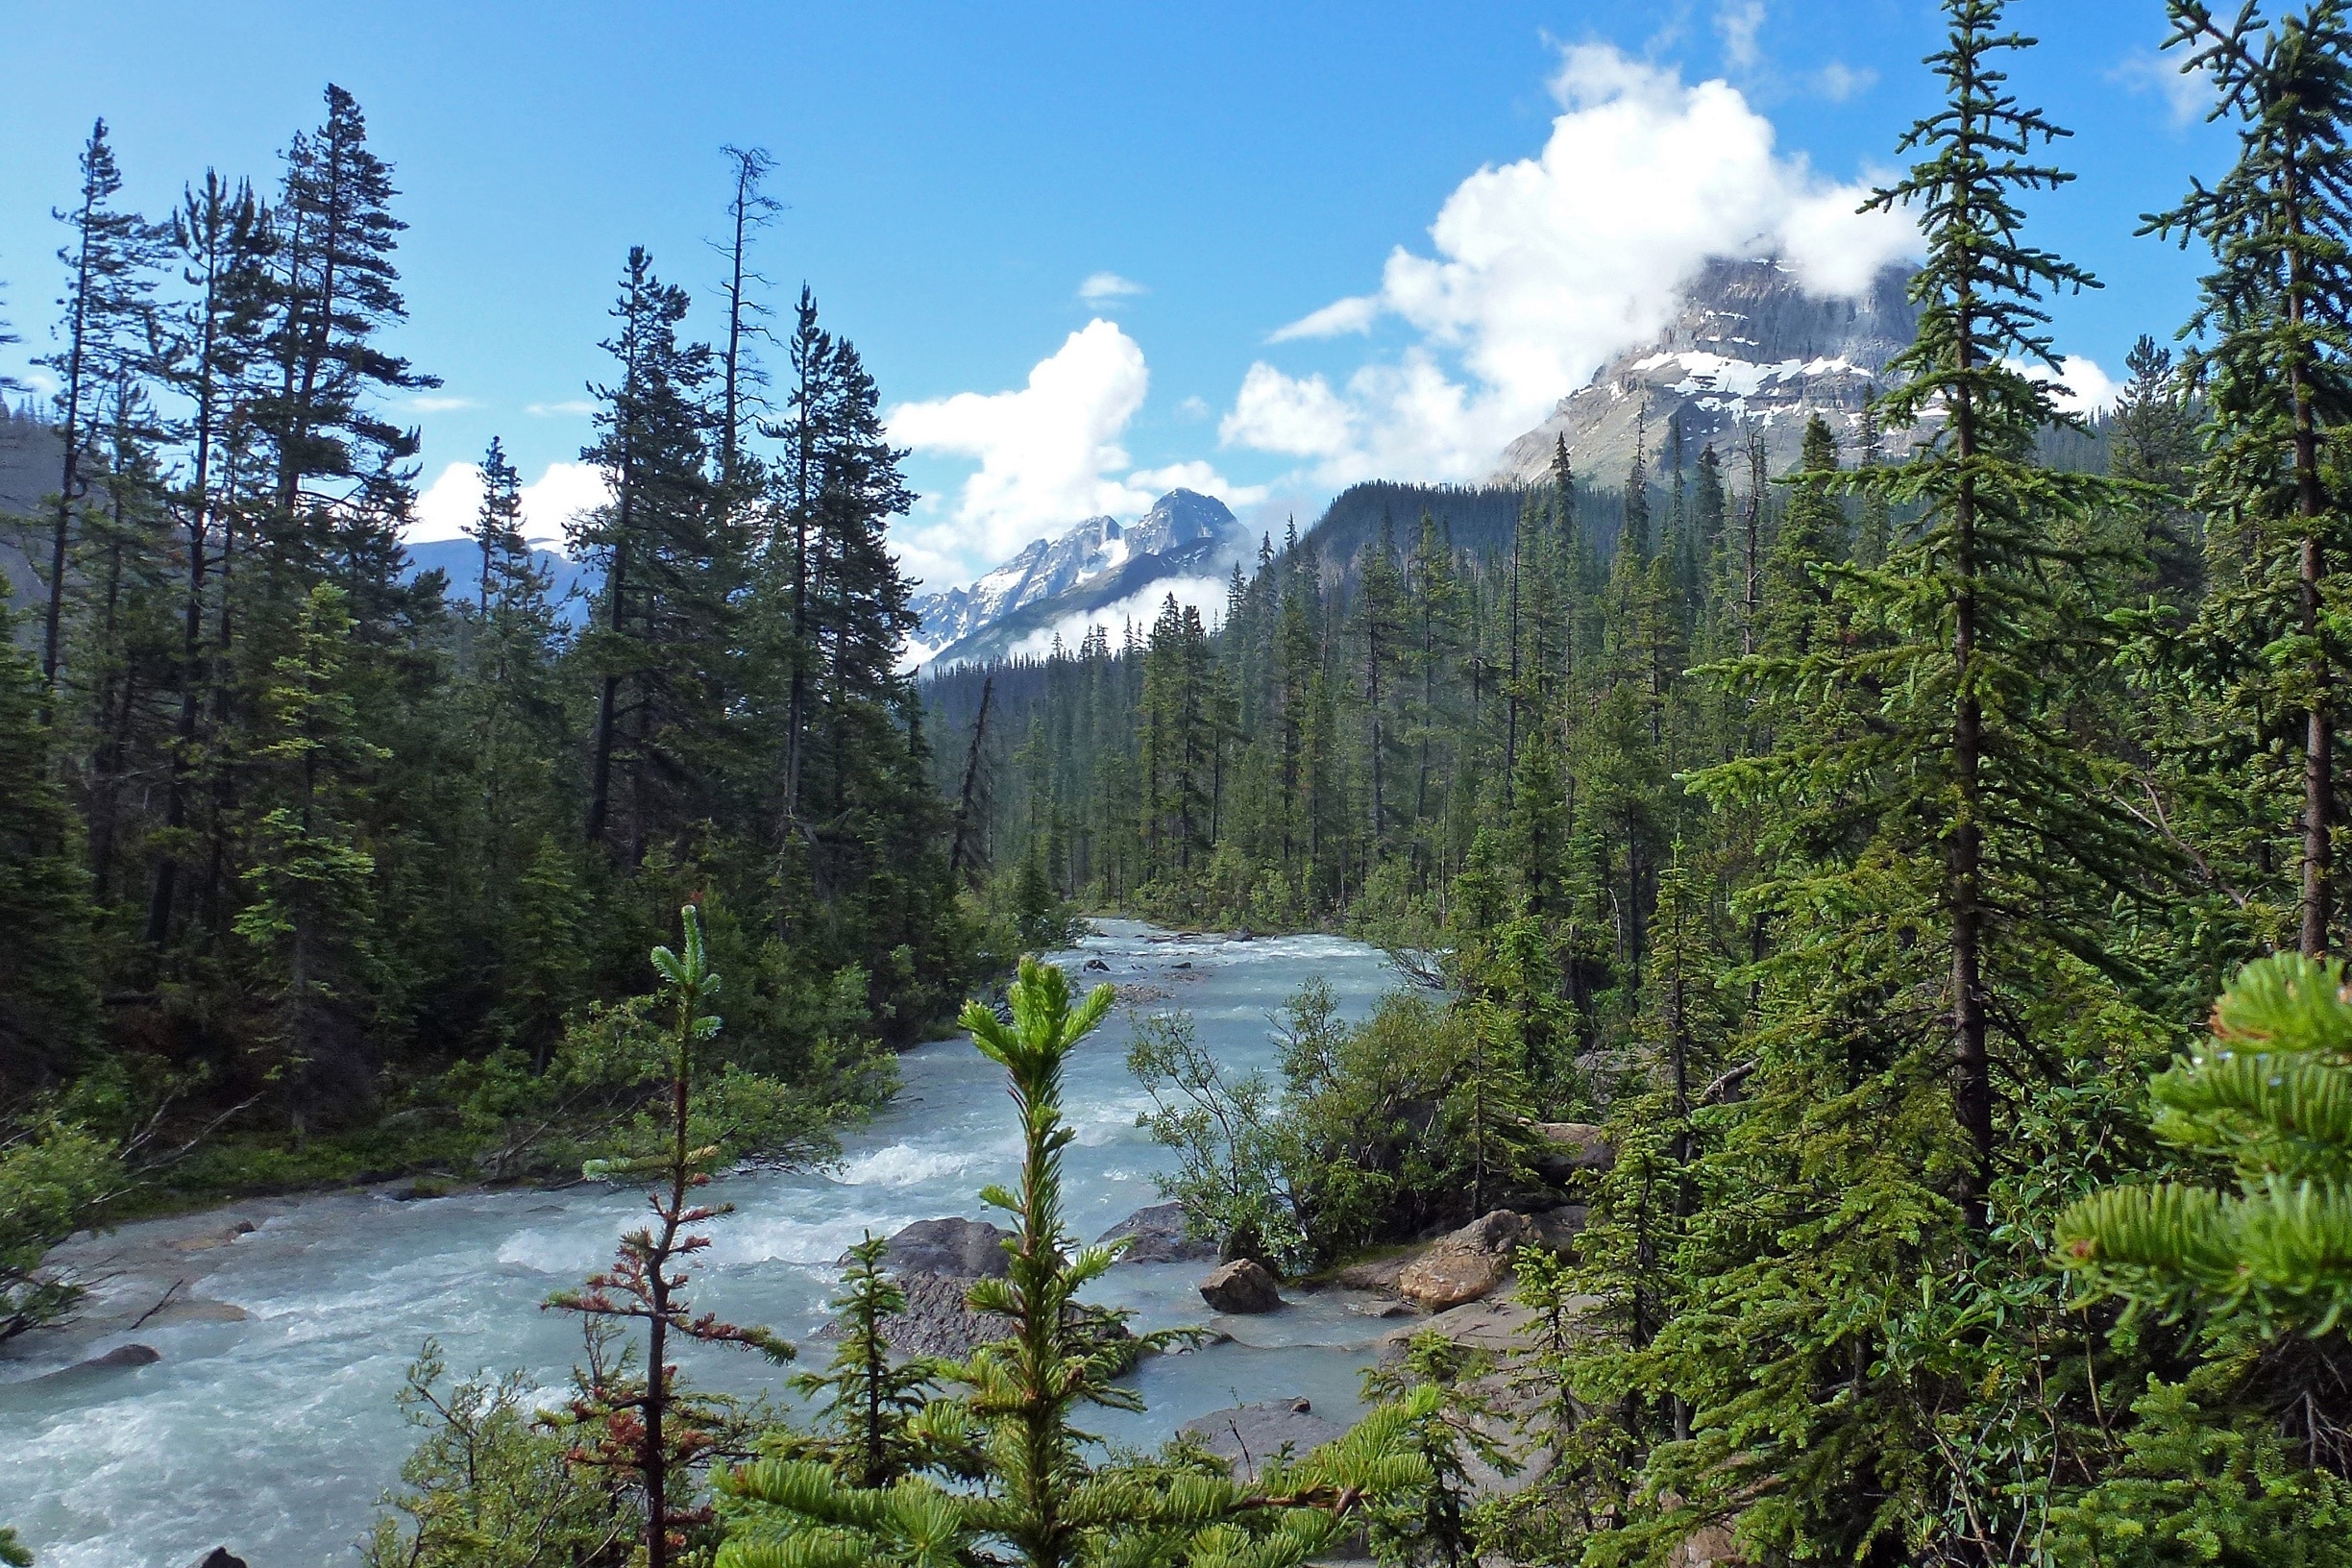 The Yoho River at Takakkaw Falls looking toward Cathedral Mountain with the peak covered in white cloud to upper right of the photo. #GreatOutdoors